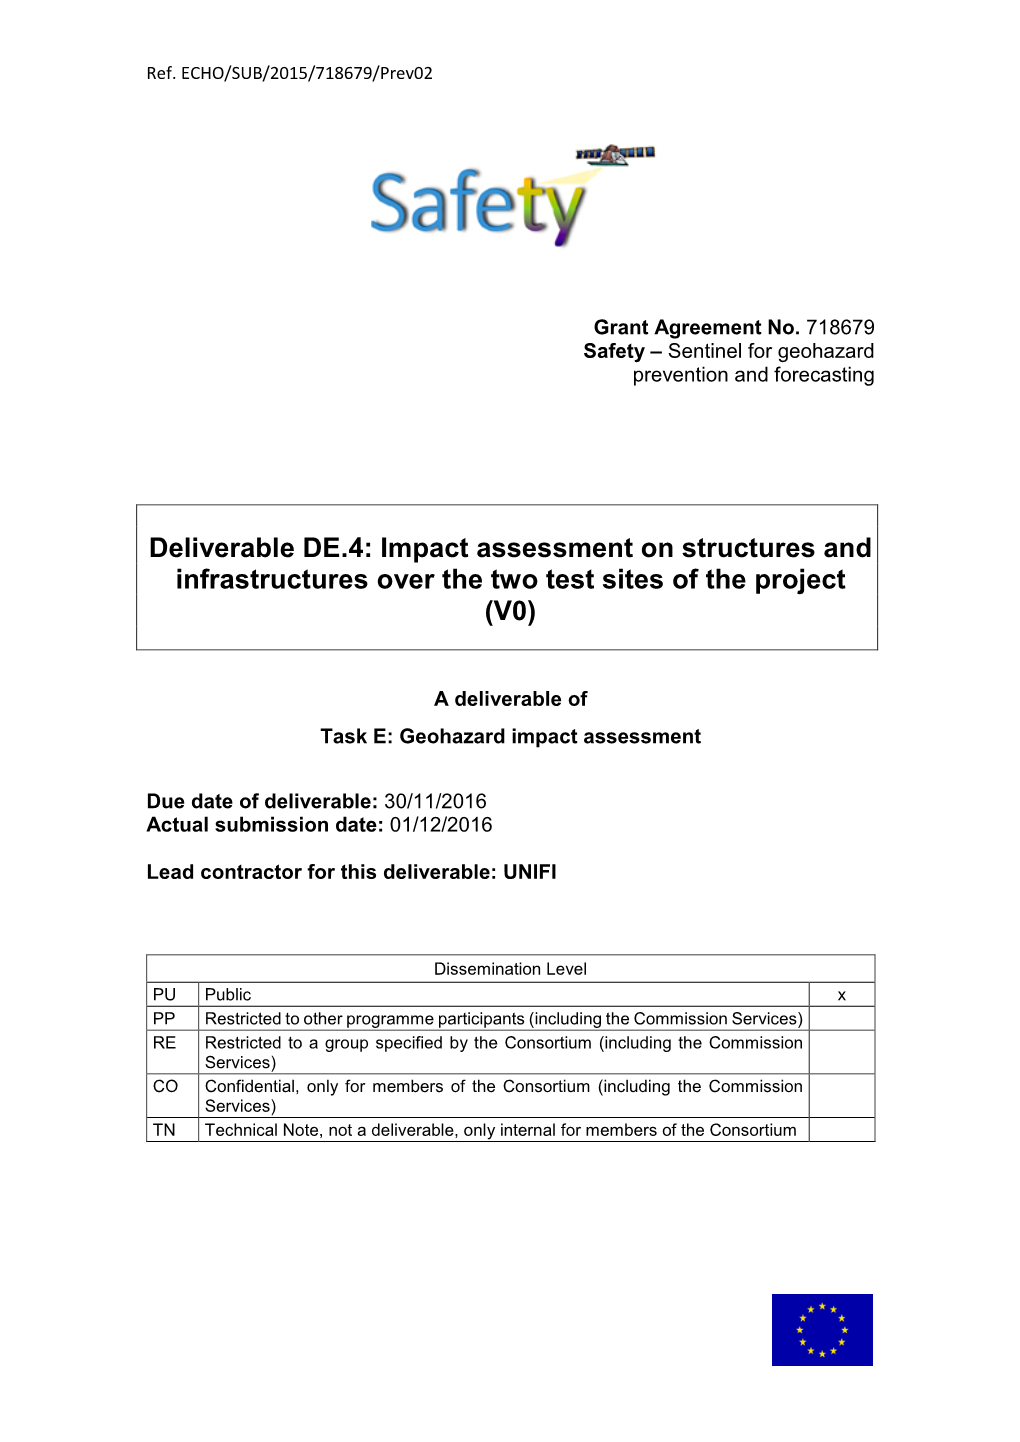 Impact Assessment on Structures and Infrastructures Over the Two Test Sites of the Project (V0)